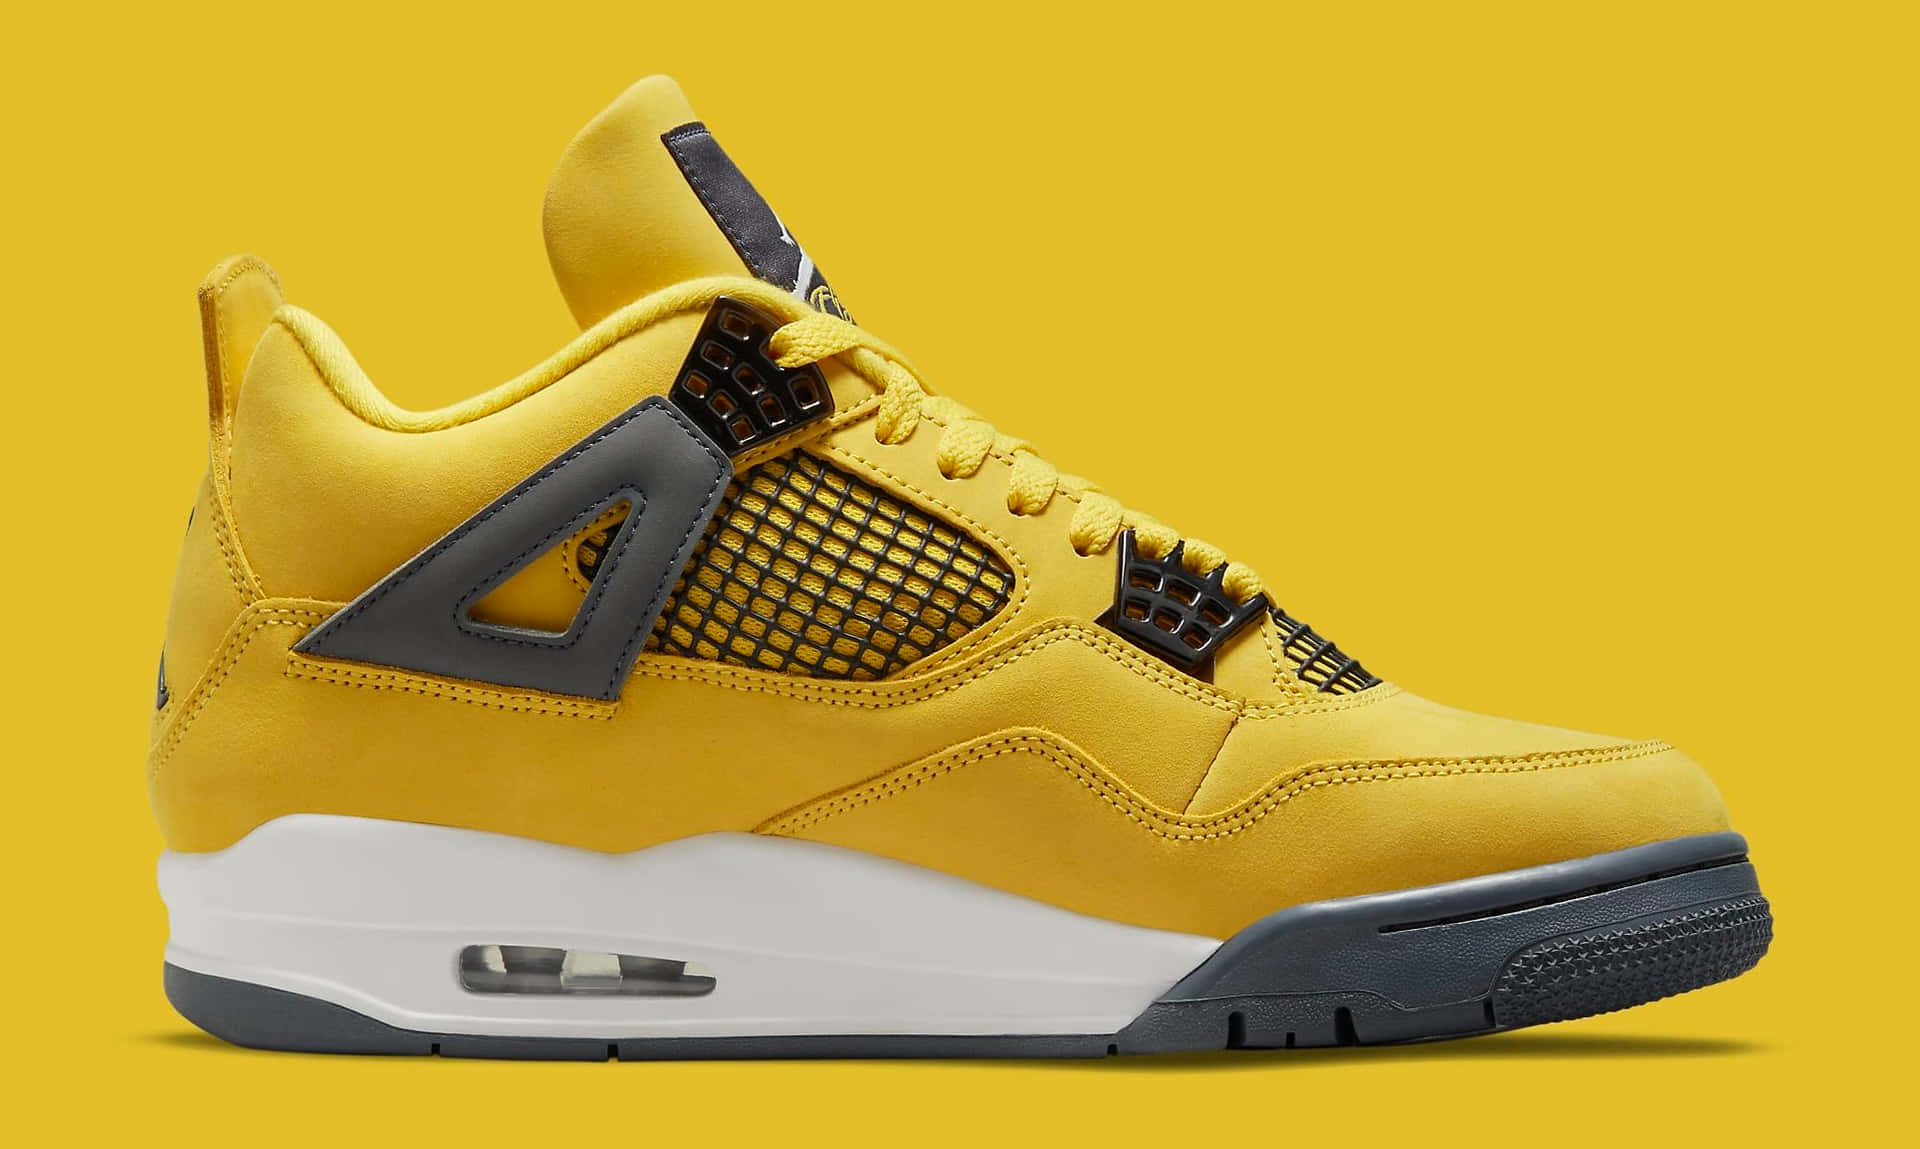 Show your support for The Jumpman with the Yellow Jordan Wallpaper